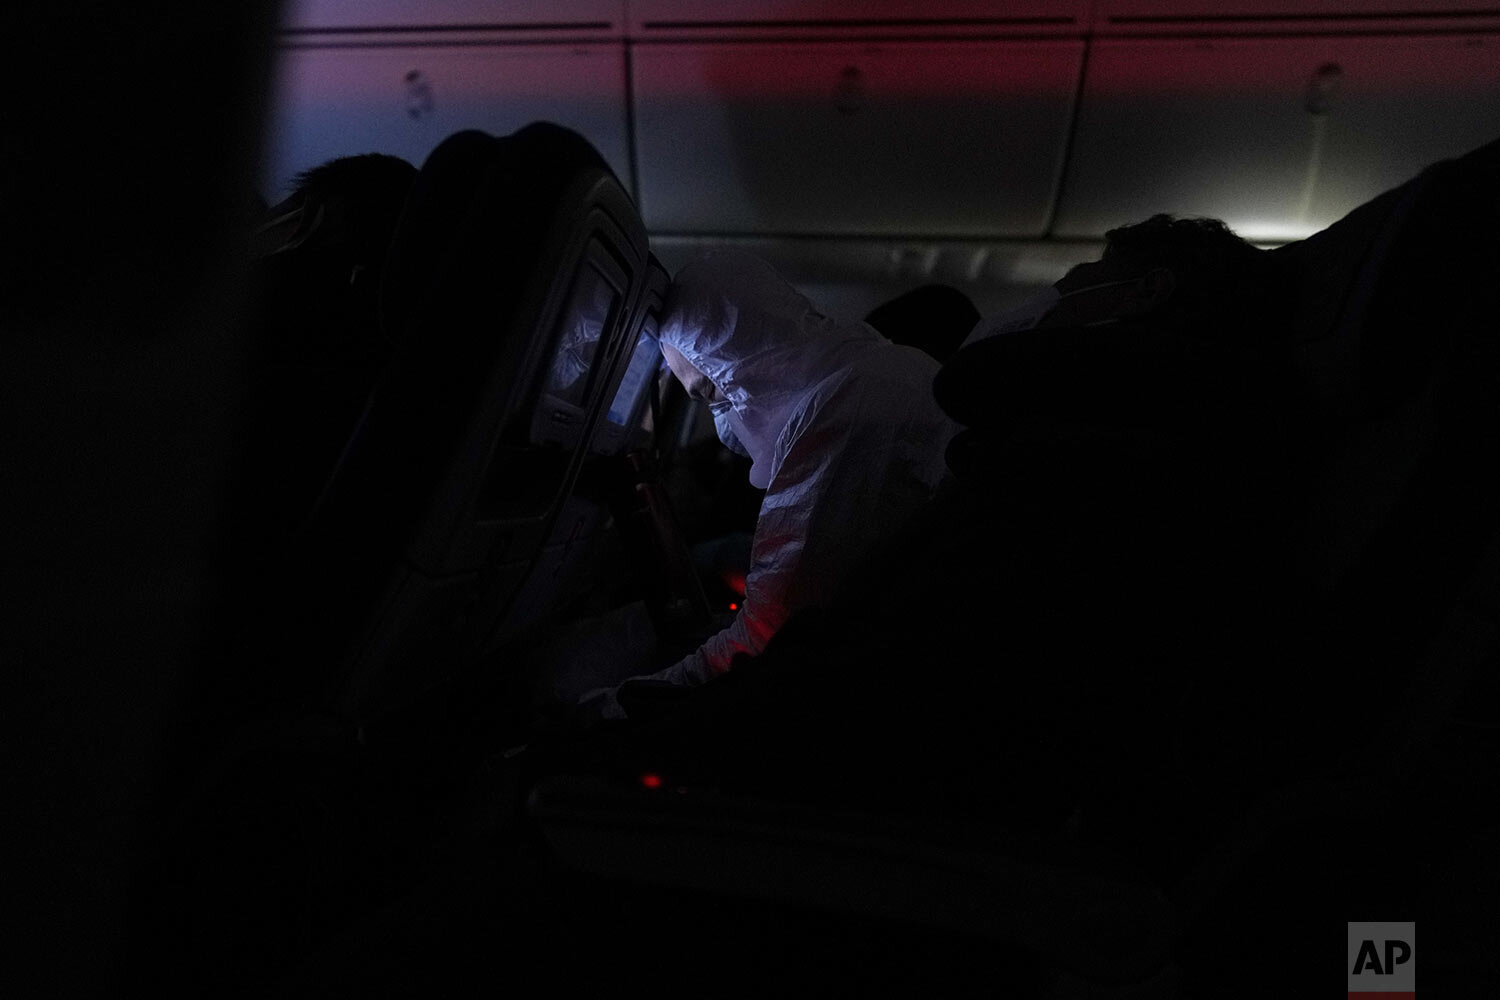  A passenger in protective gear amid the COVID-19 pandemic sleeps on a flight from Buenos Aires to Frankfurt, Germany, Sunday, July 18, 2021. (AP Photo/Natacha Pisarenko) 